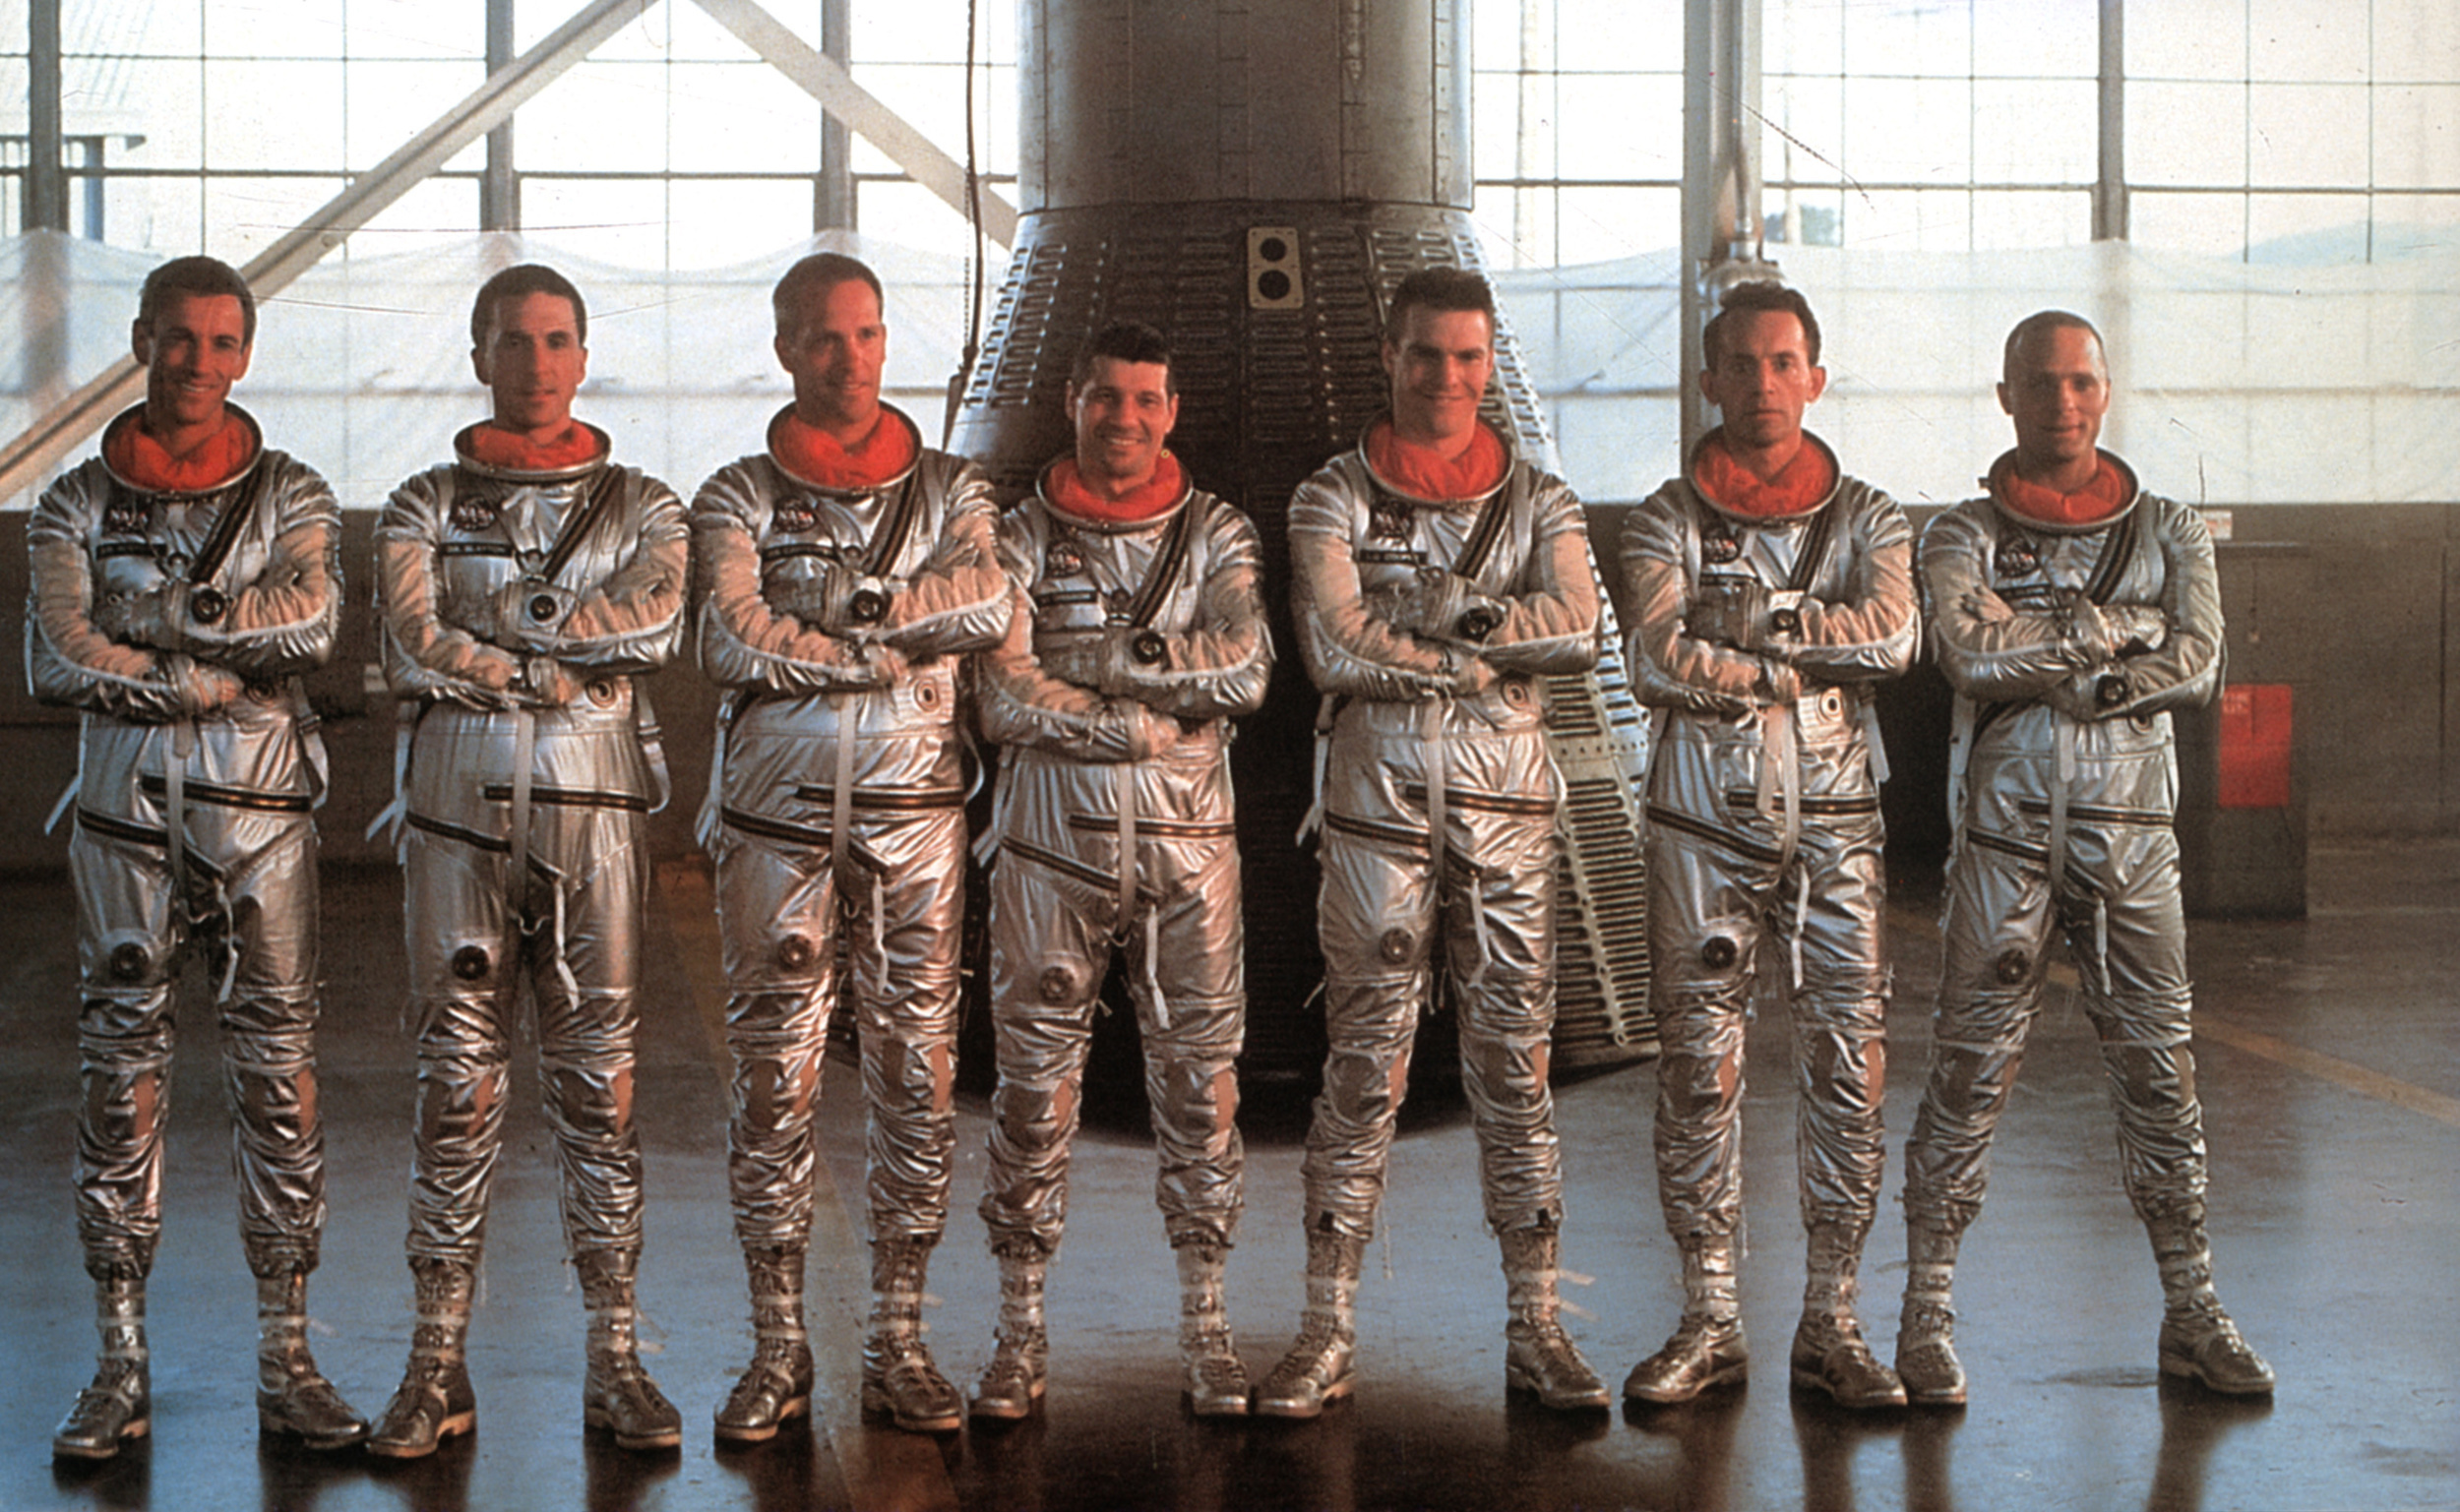 <p>Remember when America’s can-do swagger was backed up by selfless action from people with unique expertise? Philip Kaufman’s adaptation of Tom Wolfe’s New Journalism masterpiece about the early days of the United States space program centers on the Mercury Seven astronauts (played by an assortment of character actors and soon-to-be stars) and the fading glory of test pilot Chuck Yeager (Sam Shepard). It’s an inspiring, often raucously funny movie that zips through its 193-minute runtime with Mach 3 velocity. You’ll savor every second.</p><p><a href='https://www.msn.com/en-us/community/channel/vid-cj9pqbr0vn9in2b6ddcd8sfgpfq6x6utp44fssrv6mc2gtybw0us'>Follow us on MSN to see more of our exclusive entertainment content.</a></p>